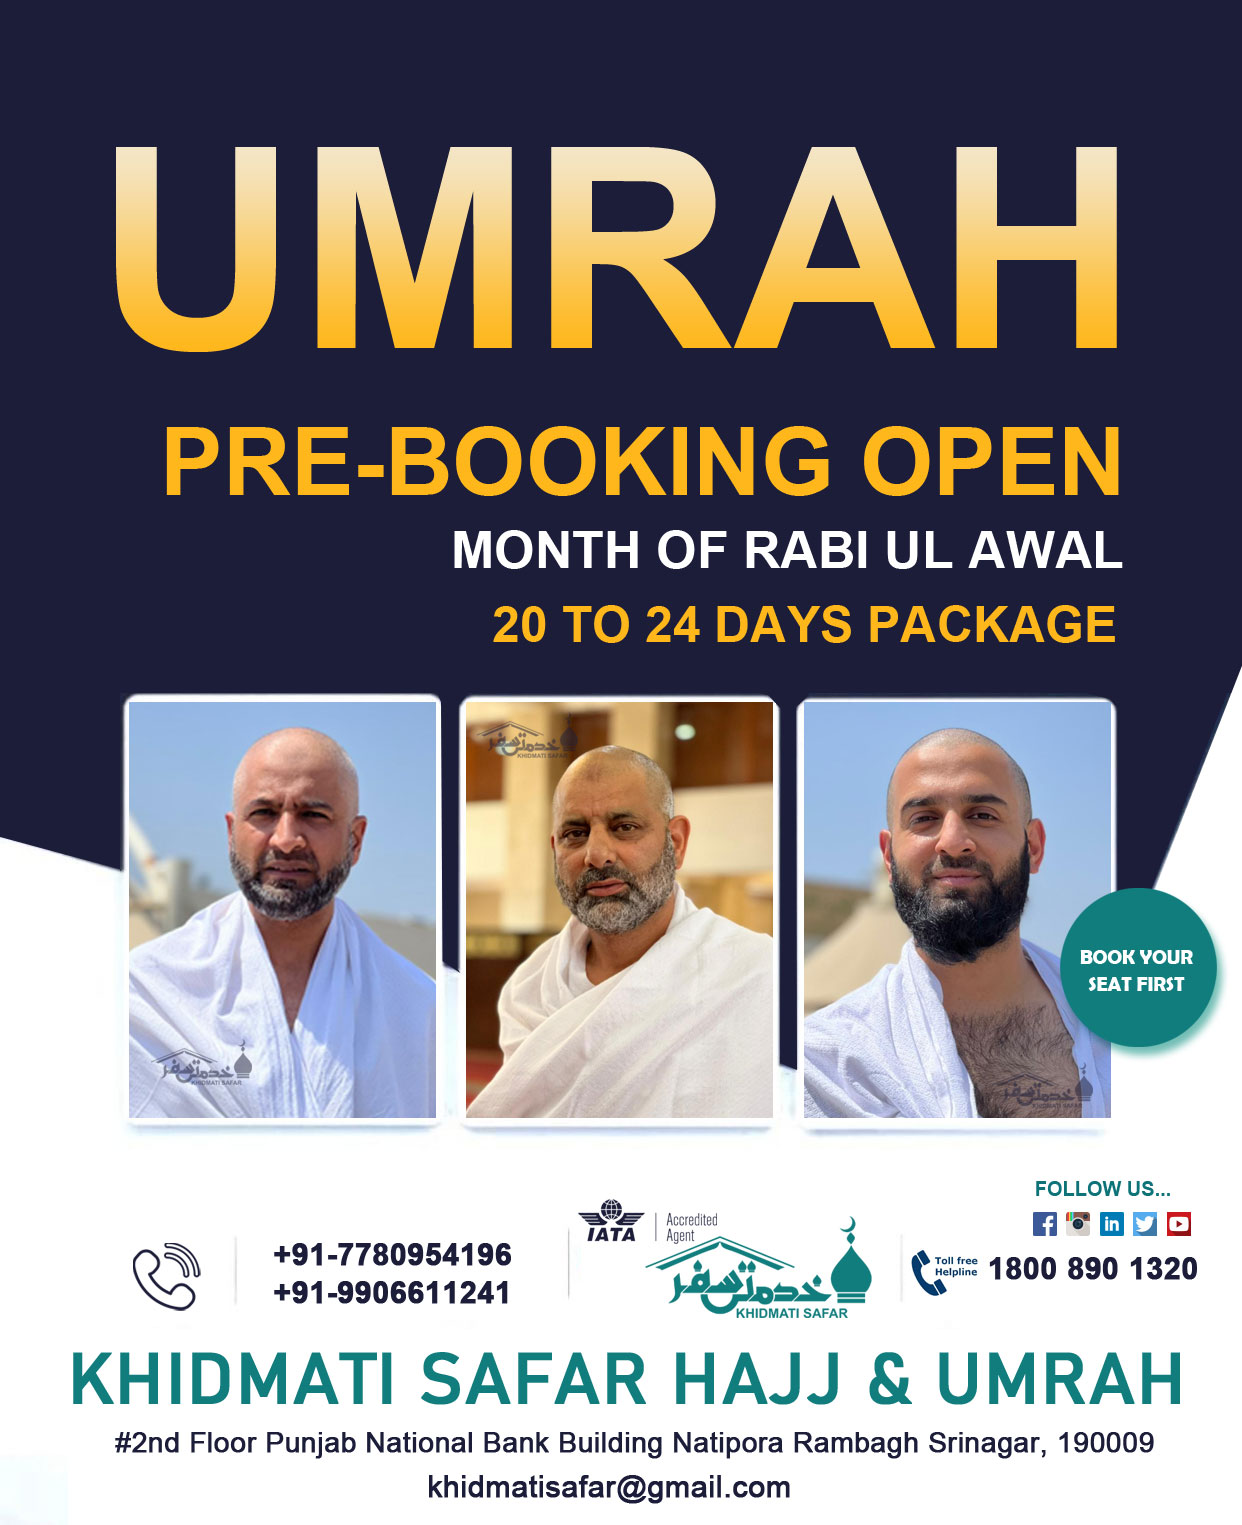 We provide different Umrah Packages